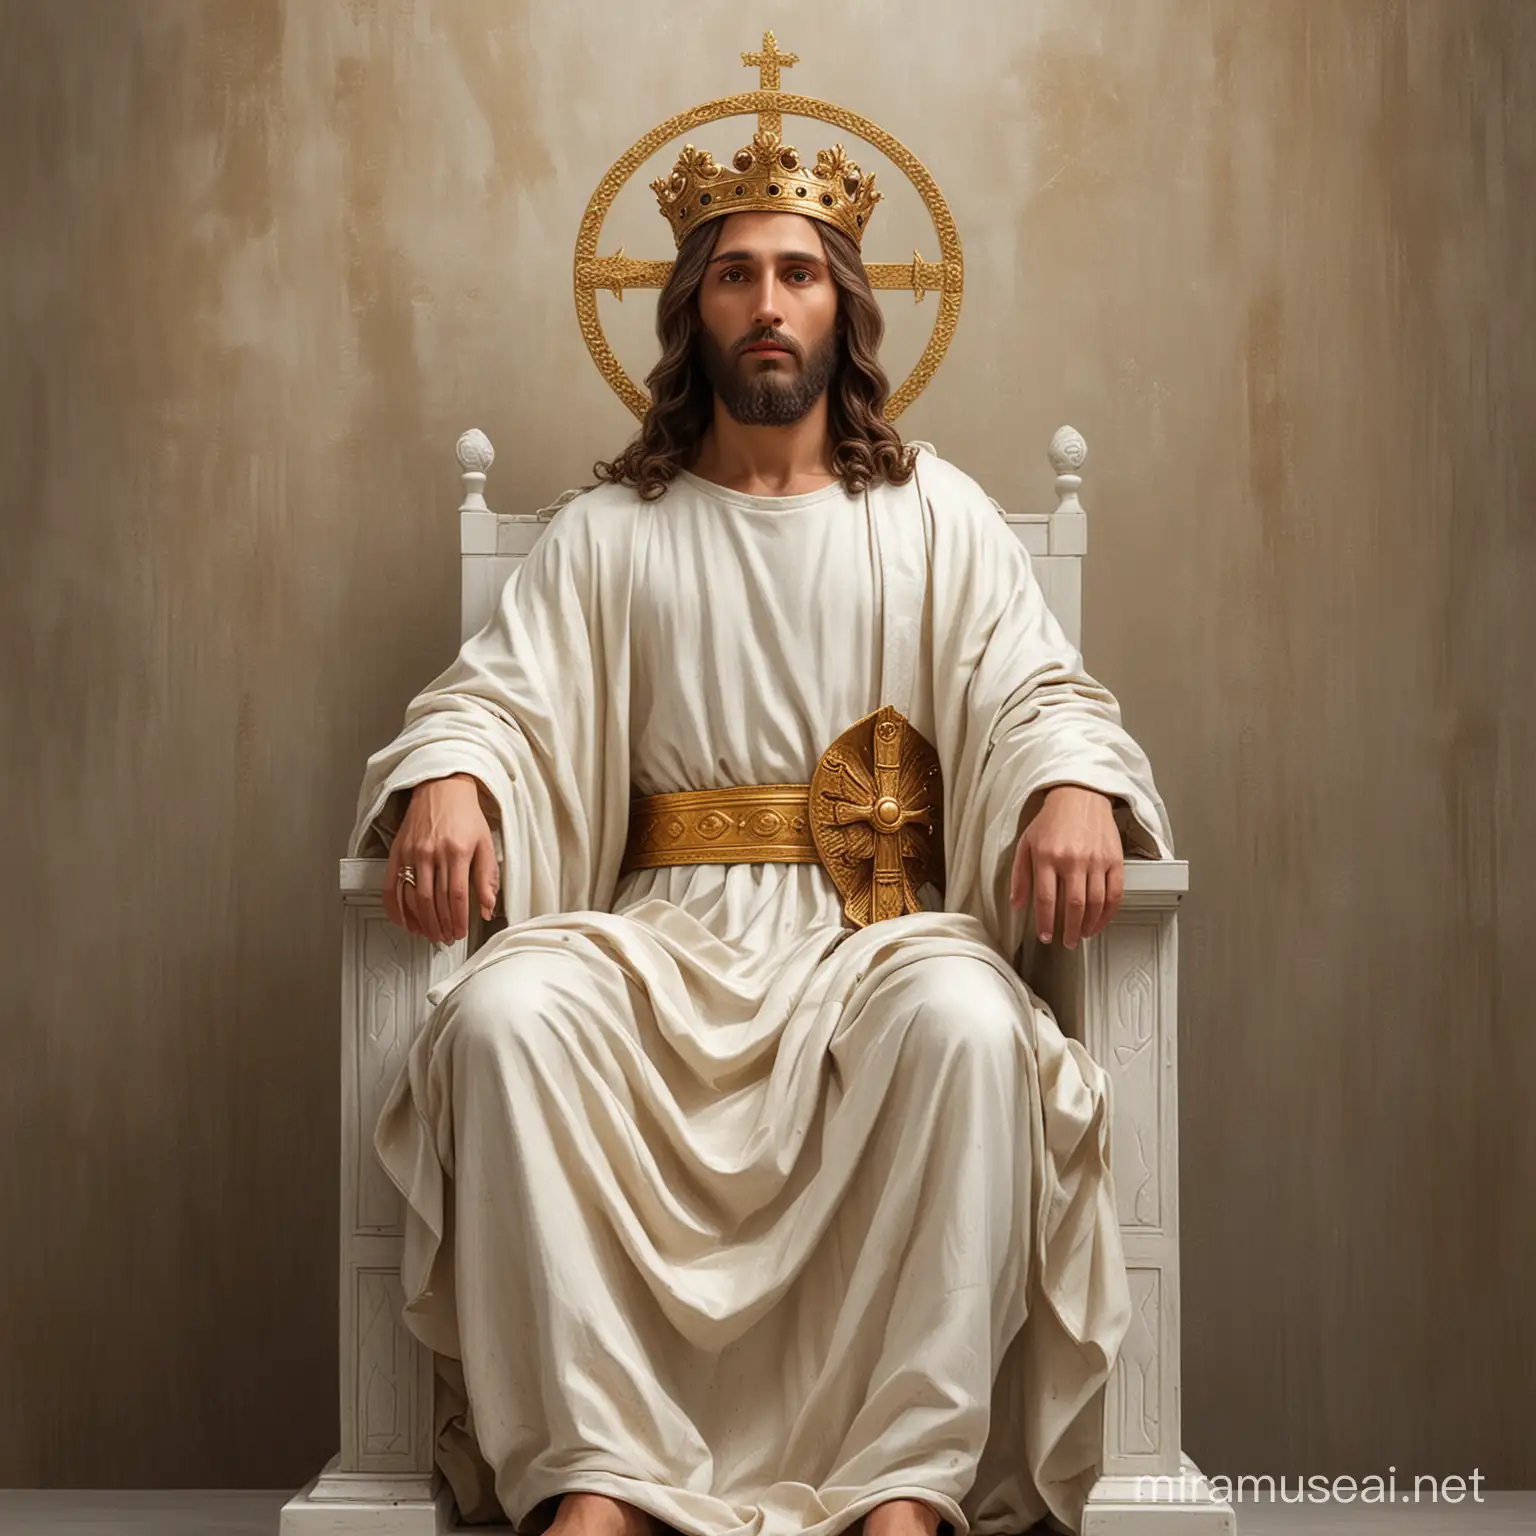 christ sitting on the throne with round crown